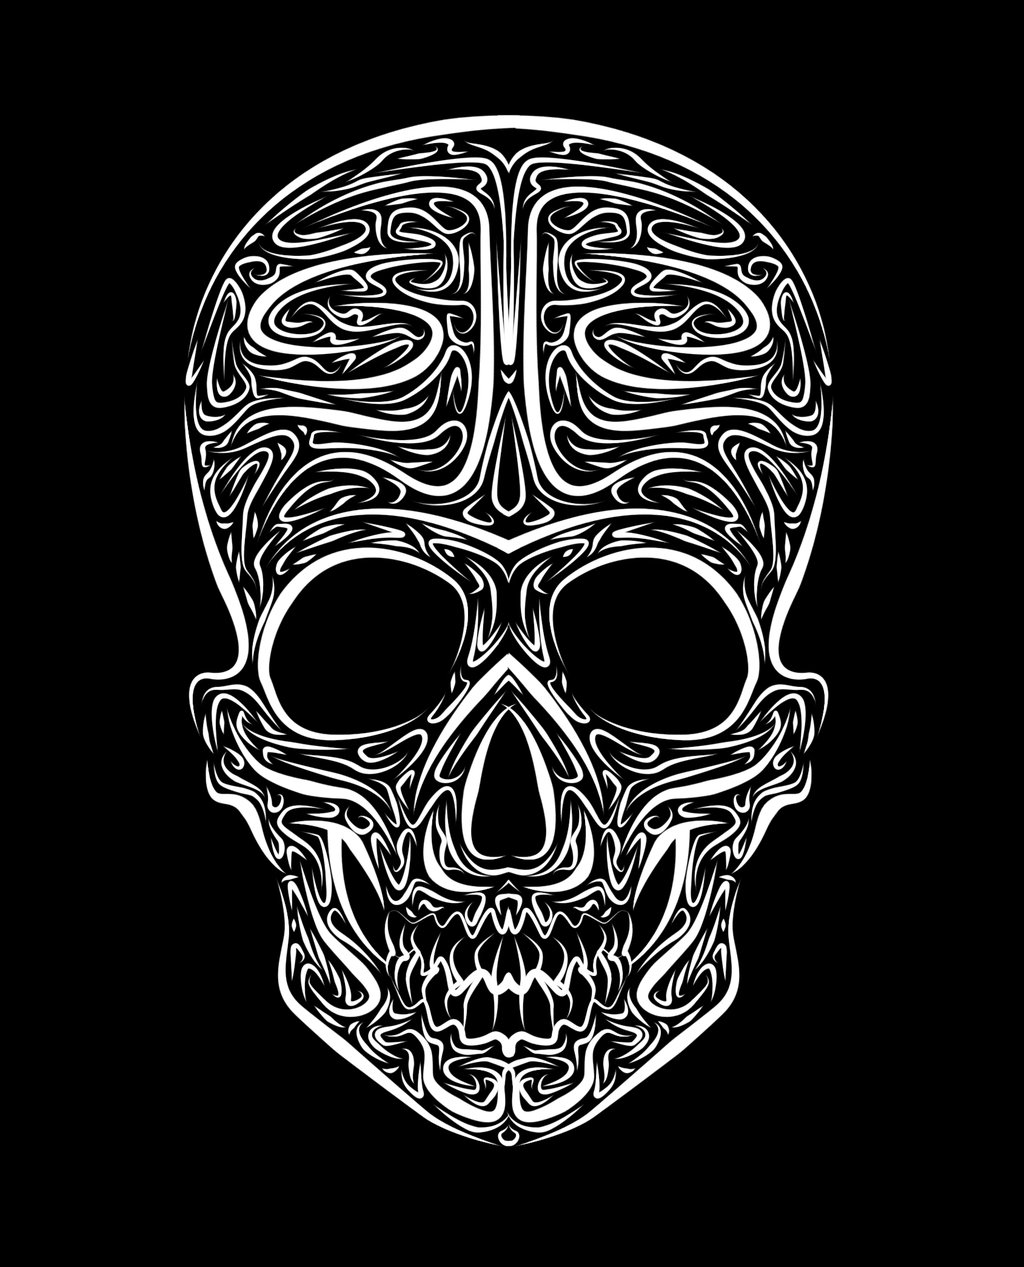 Skull Tribal Vector by Mental4Metal666 on Clipart library